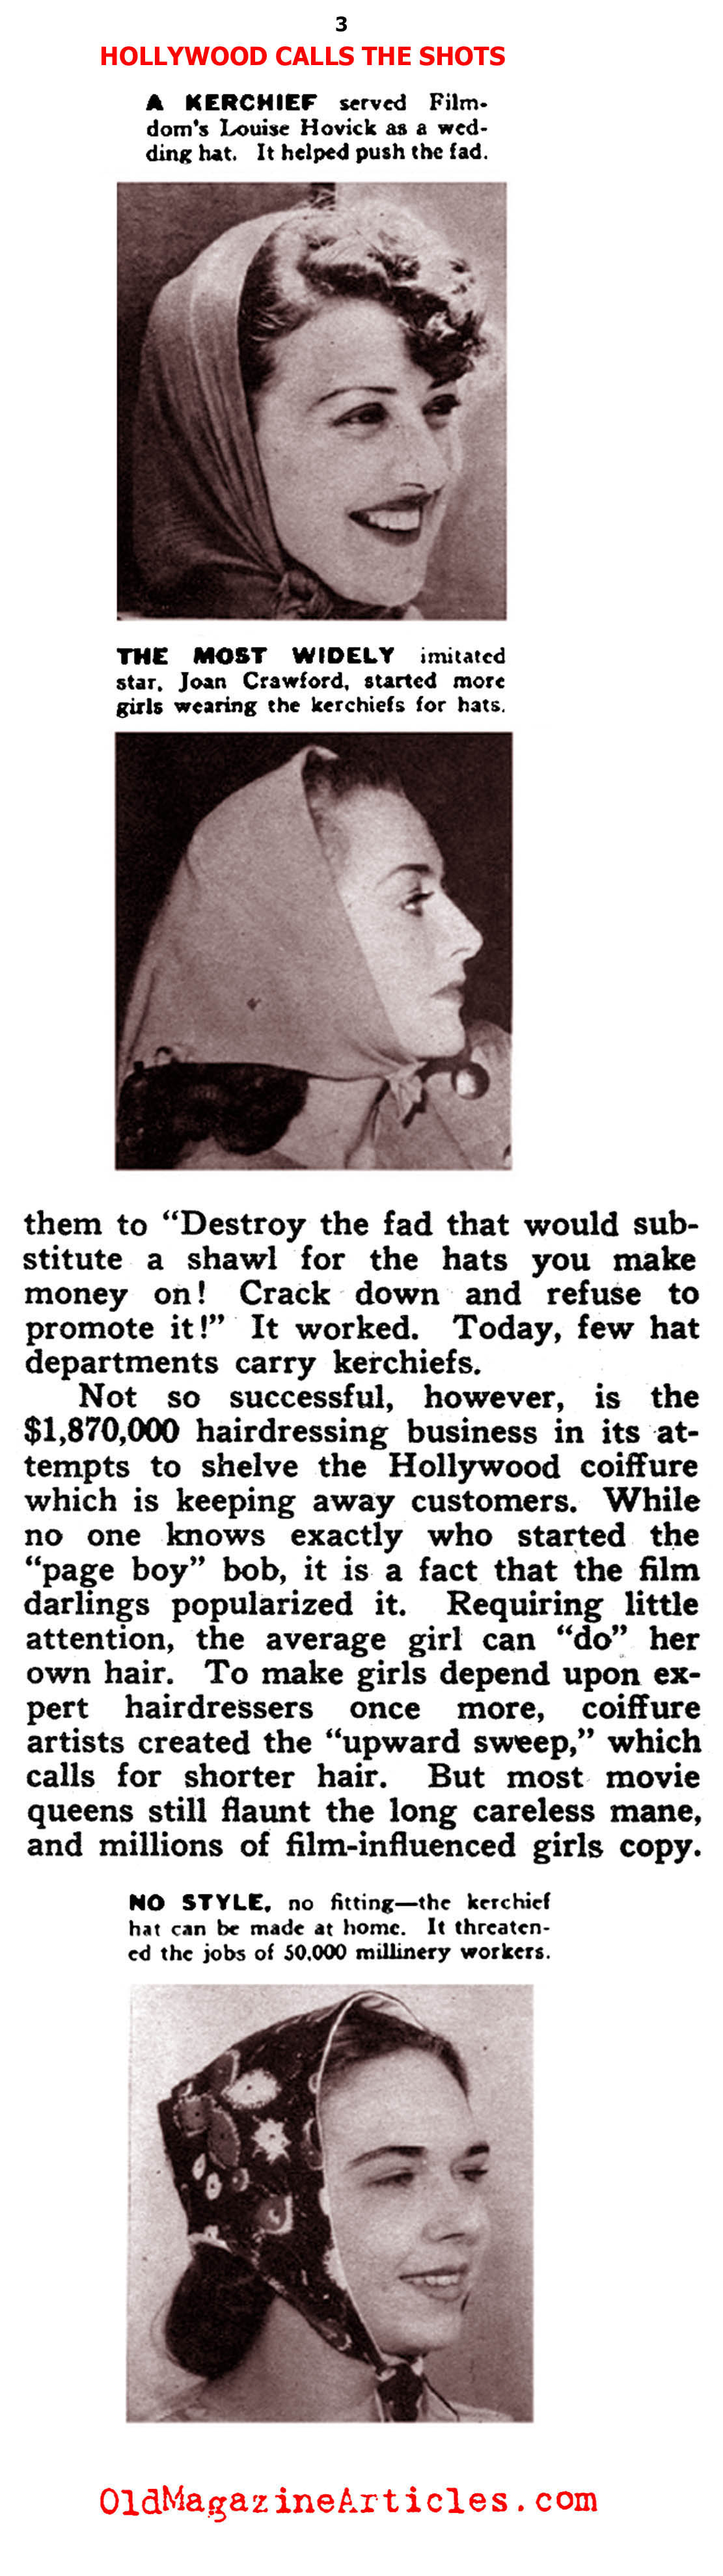 Hollywood Stylists vs the Fashion Industry (Click Magazine, 1938)